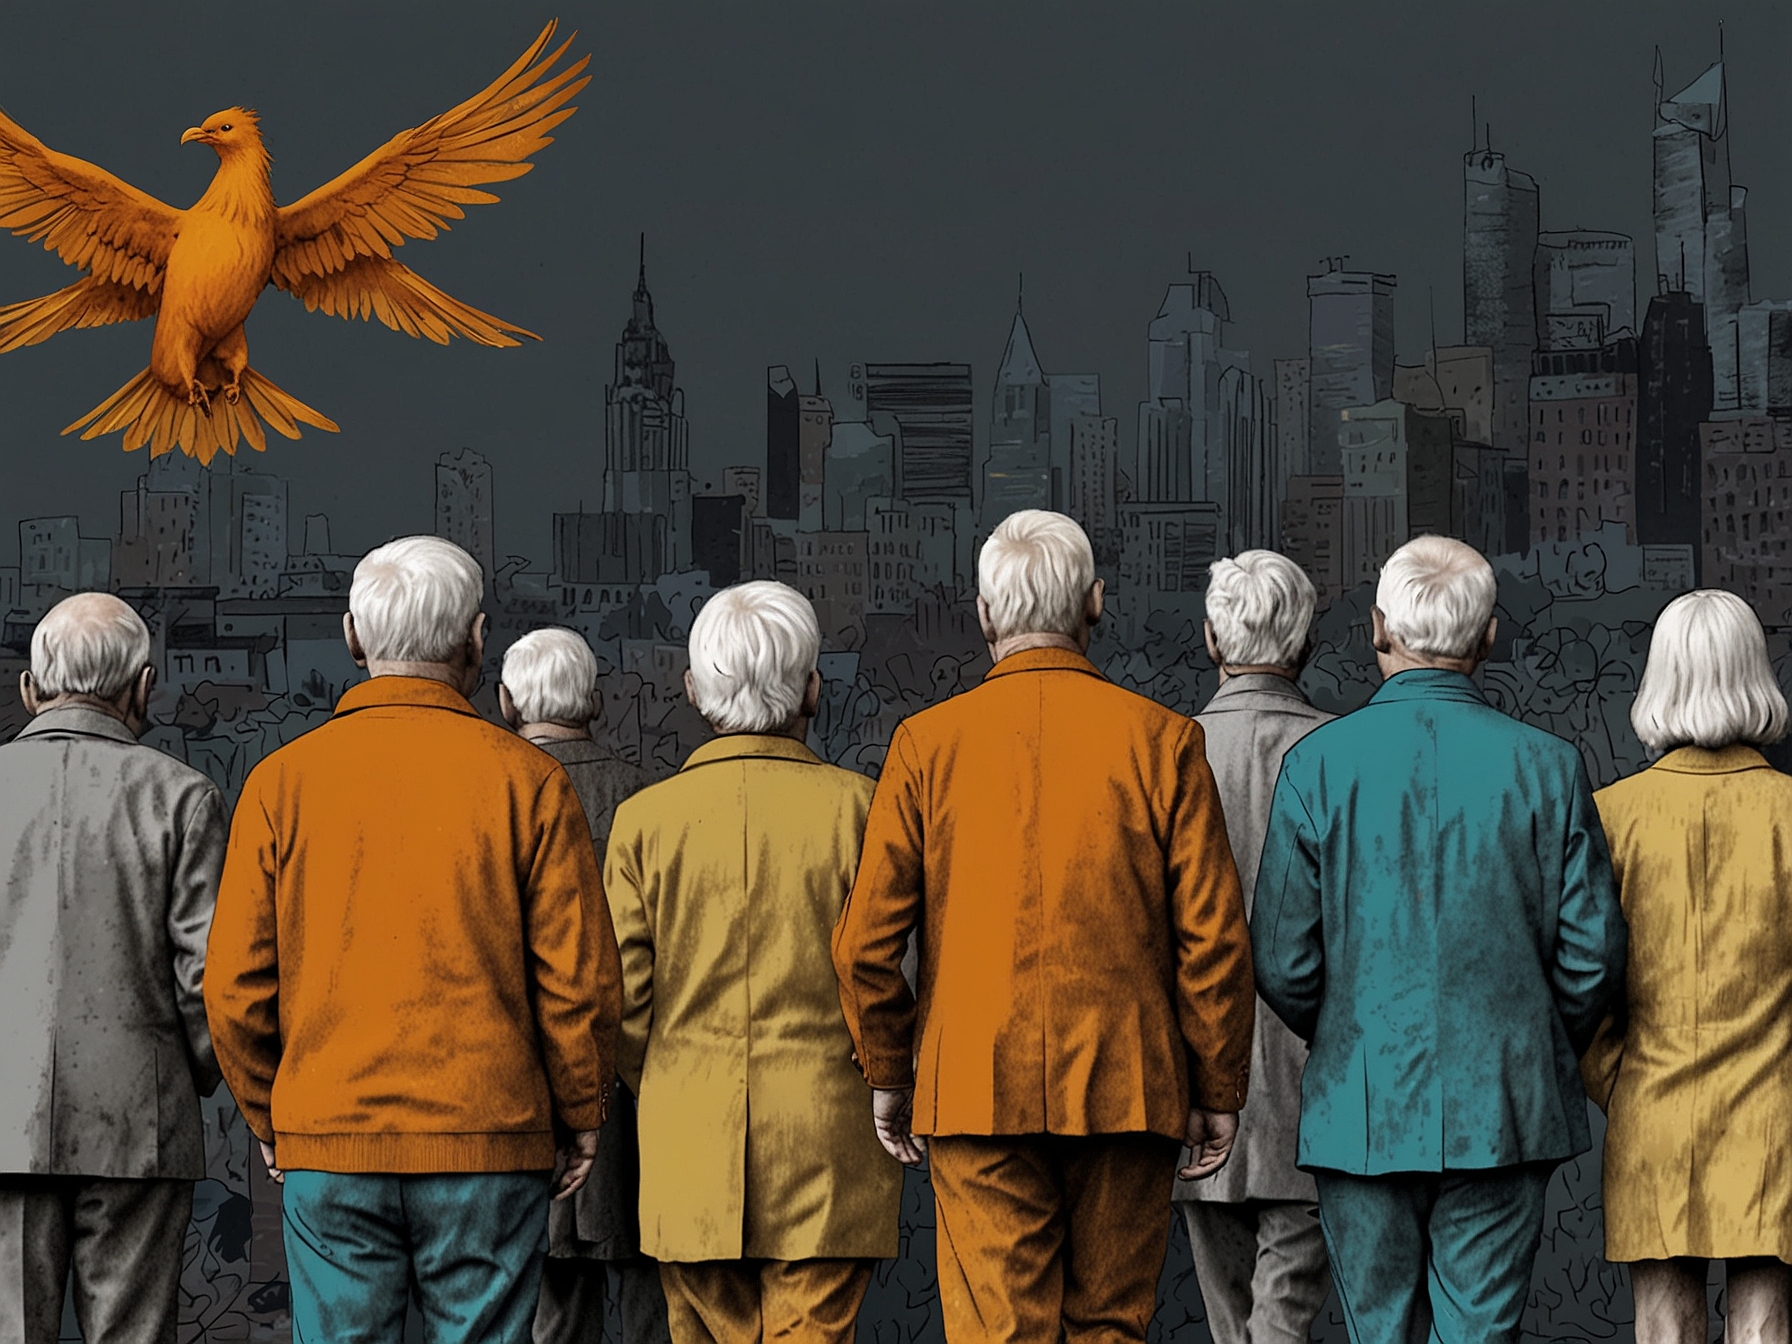 A graphic showcasing the aging UK population and the increasing demand for retirement savings products, highlighting Phoenix Group's new core market focus after selling SunLife.